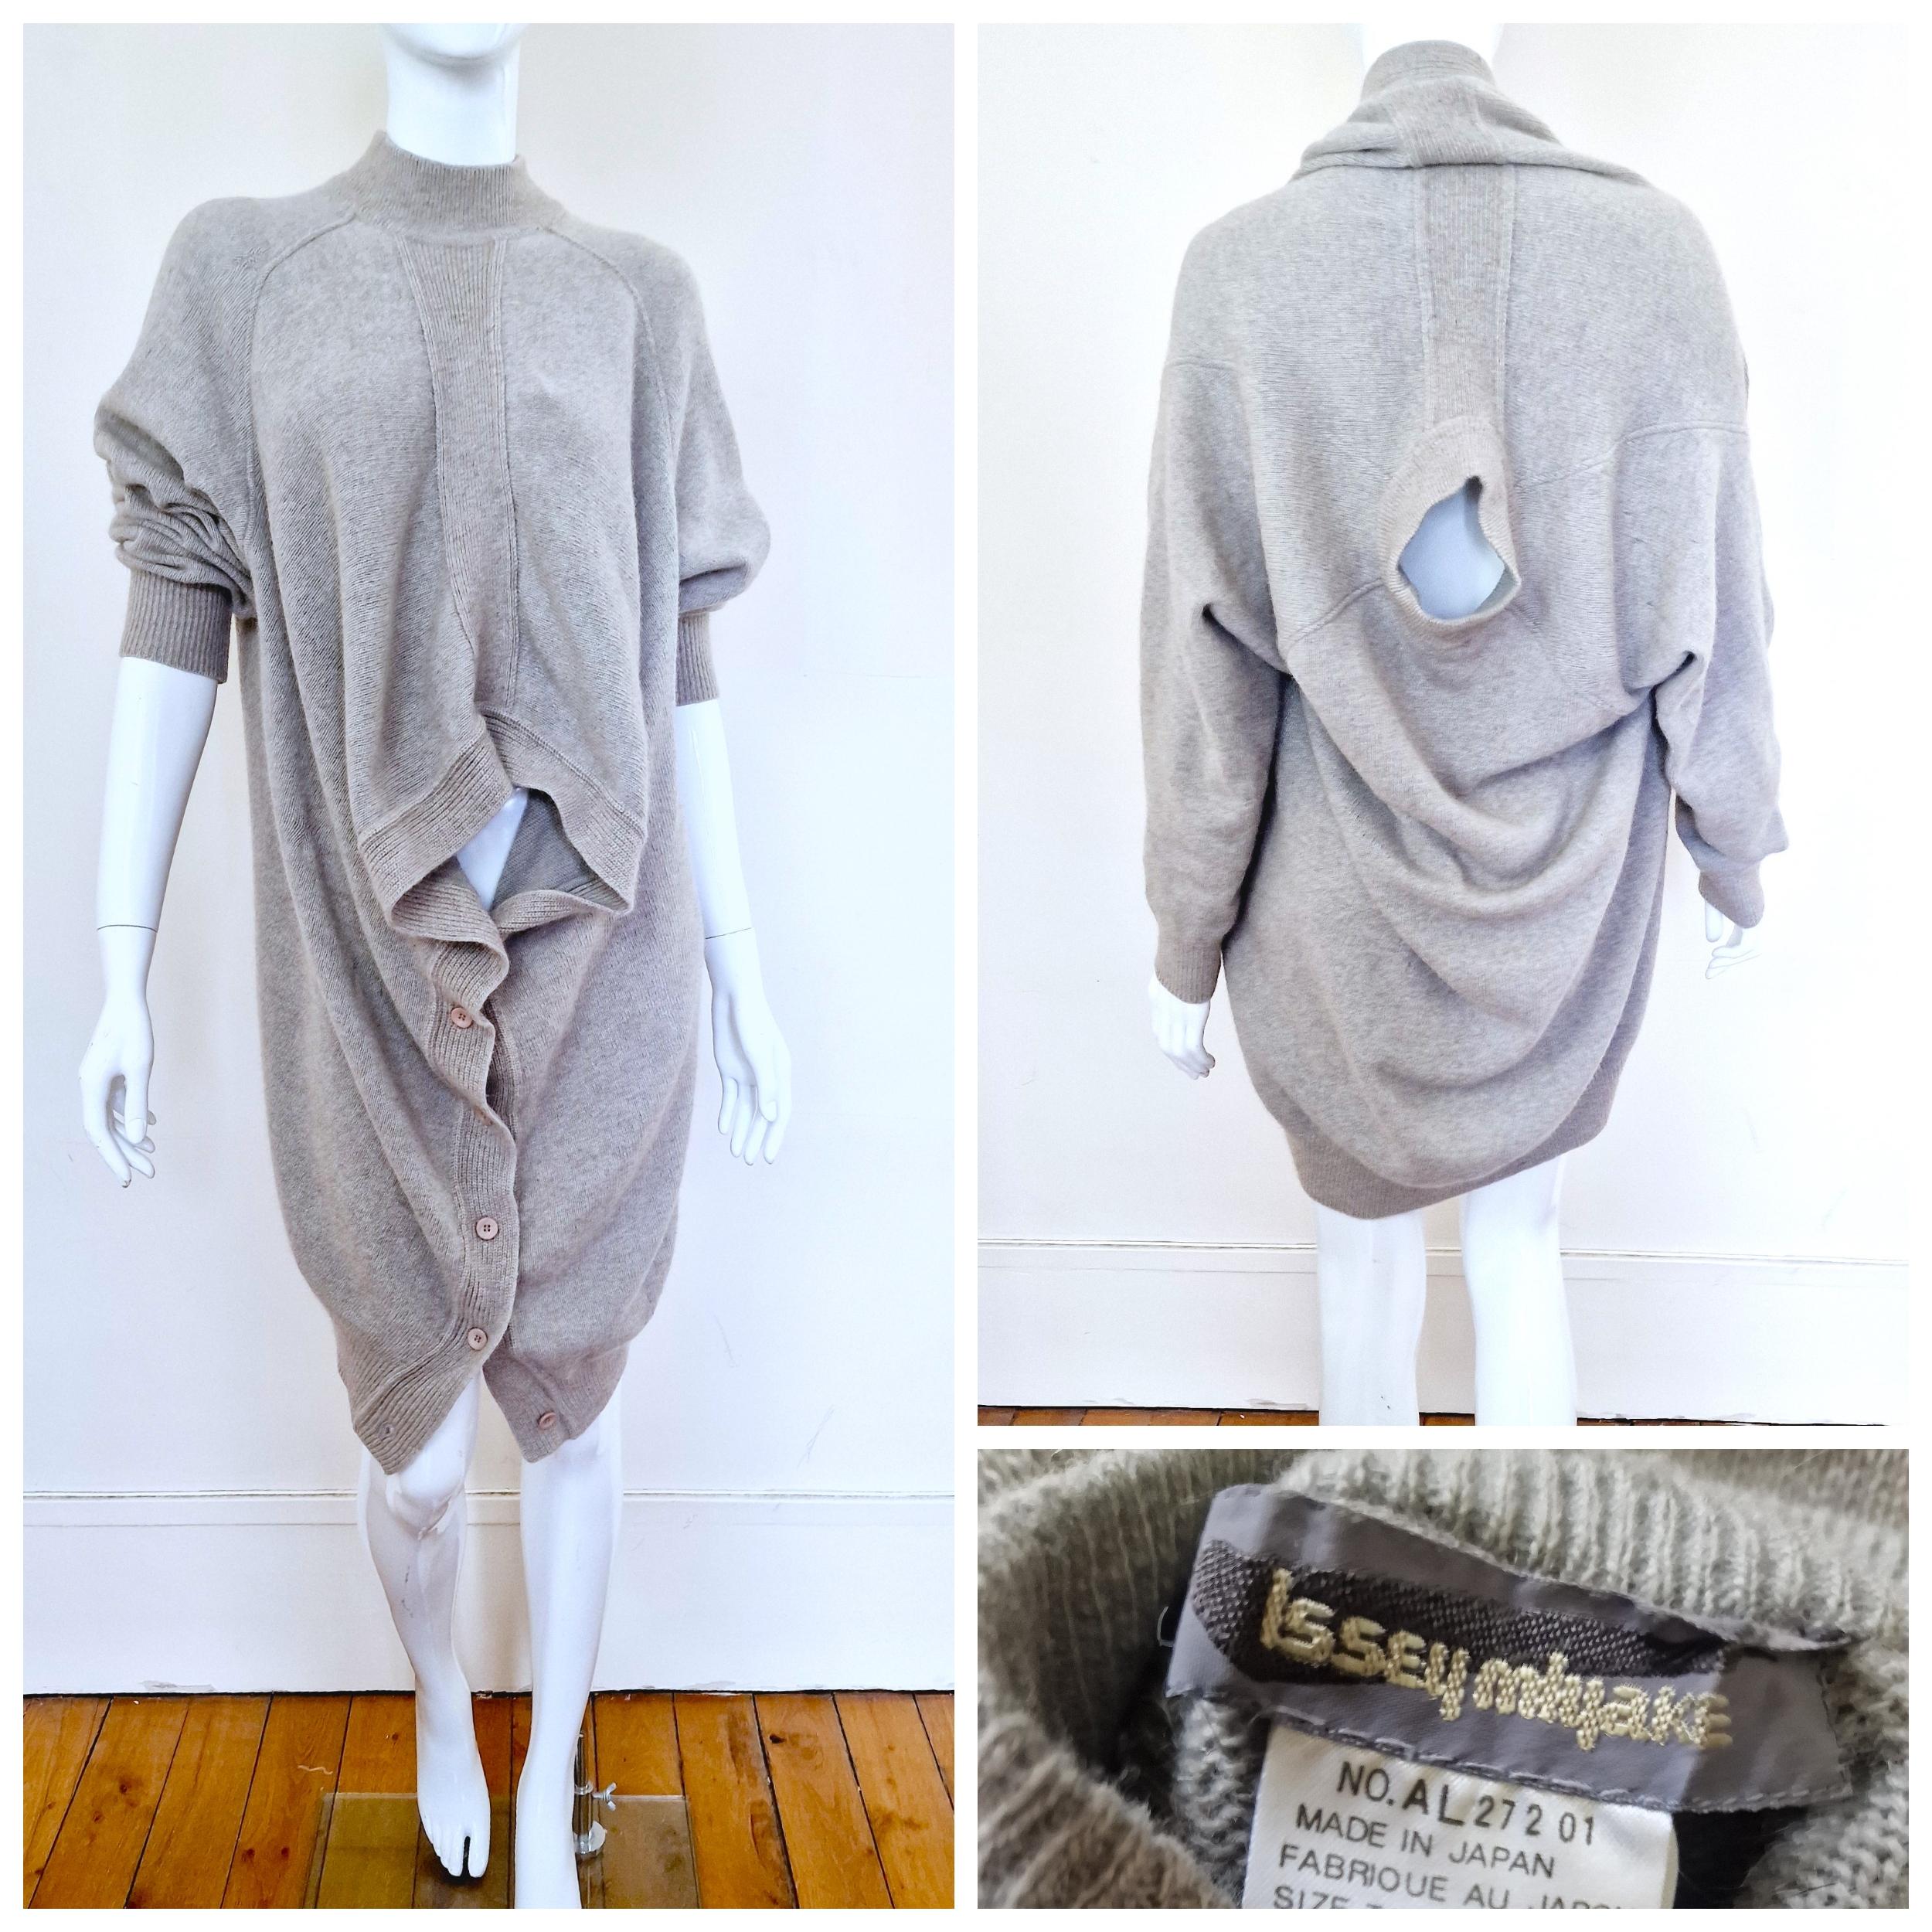 RARE Issey Miyake wool dress coat !
Is can be worn in 2 ways! 2 holes for the head :)
Check the photos!

VERY GOOD condition!

SIZE
It is one size for men and women (if you do not mind oversize look). 
Marked size: medium.
Length: 84 cm / 33